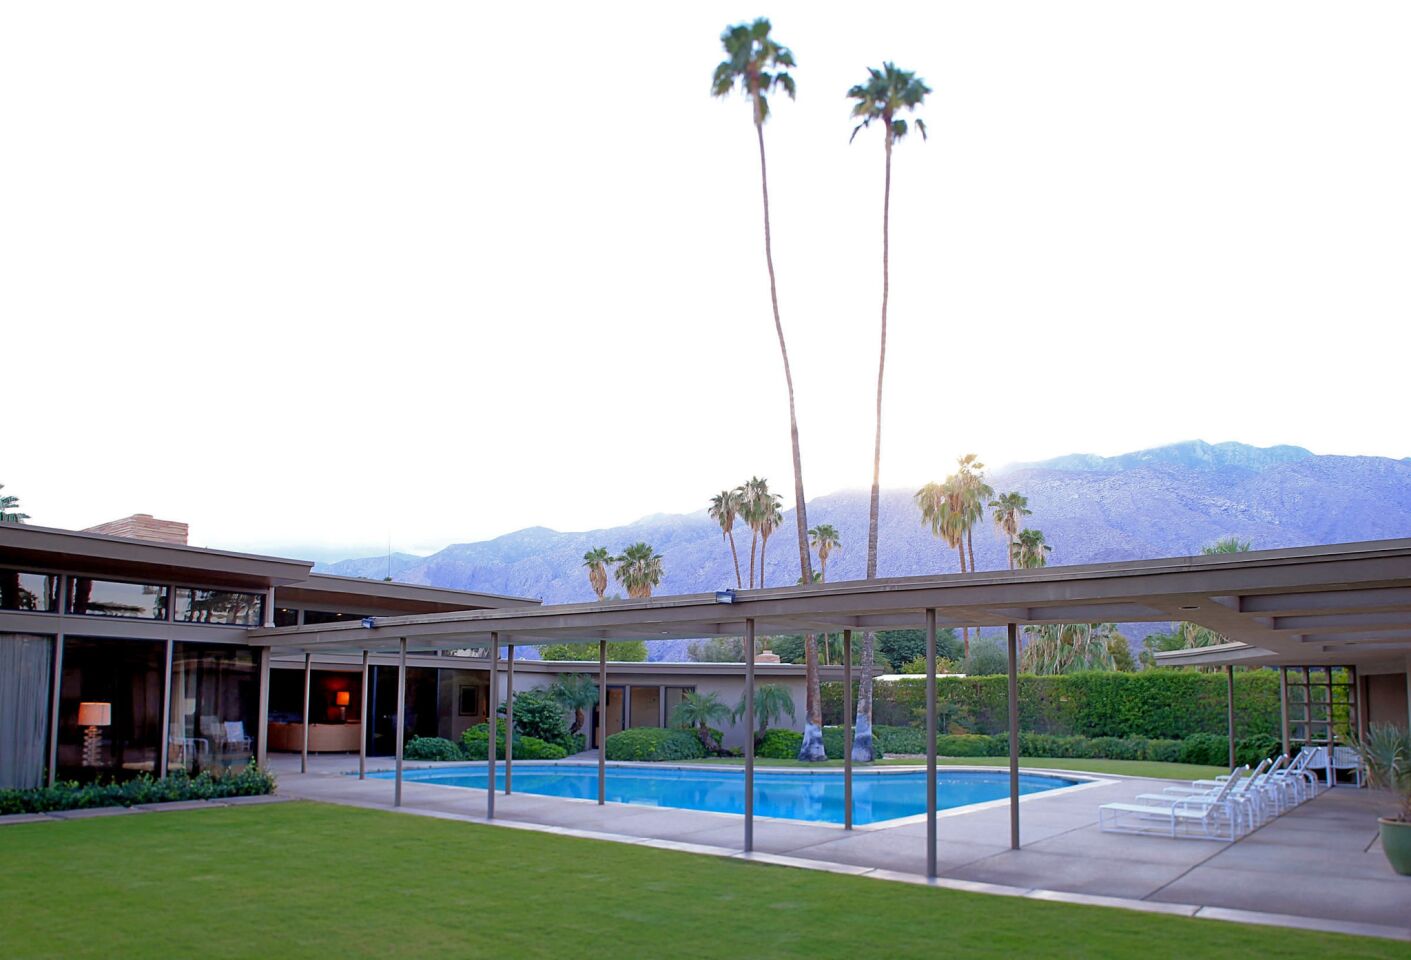 Frank Sinatra and Palm Springs